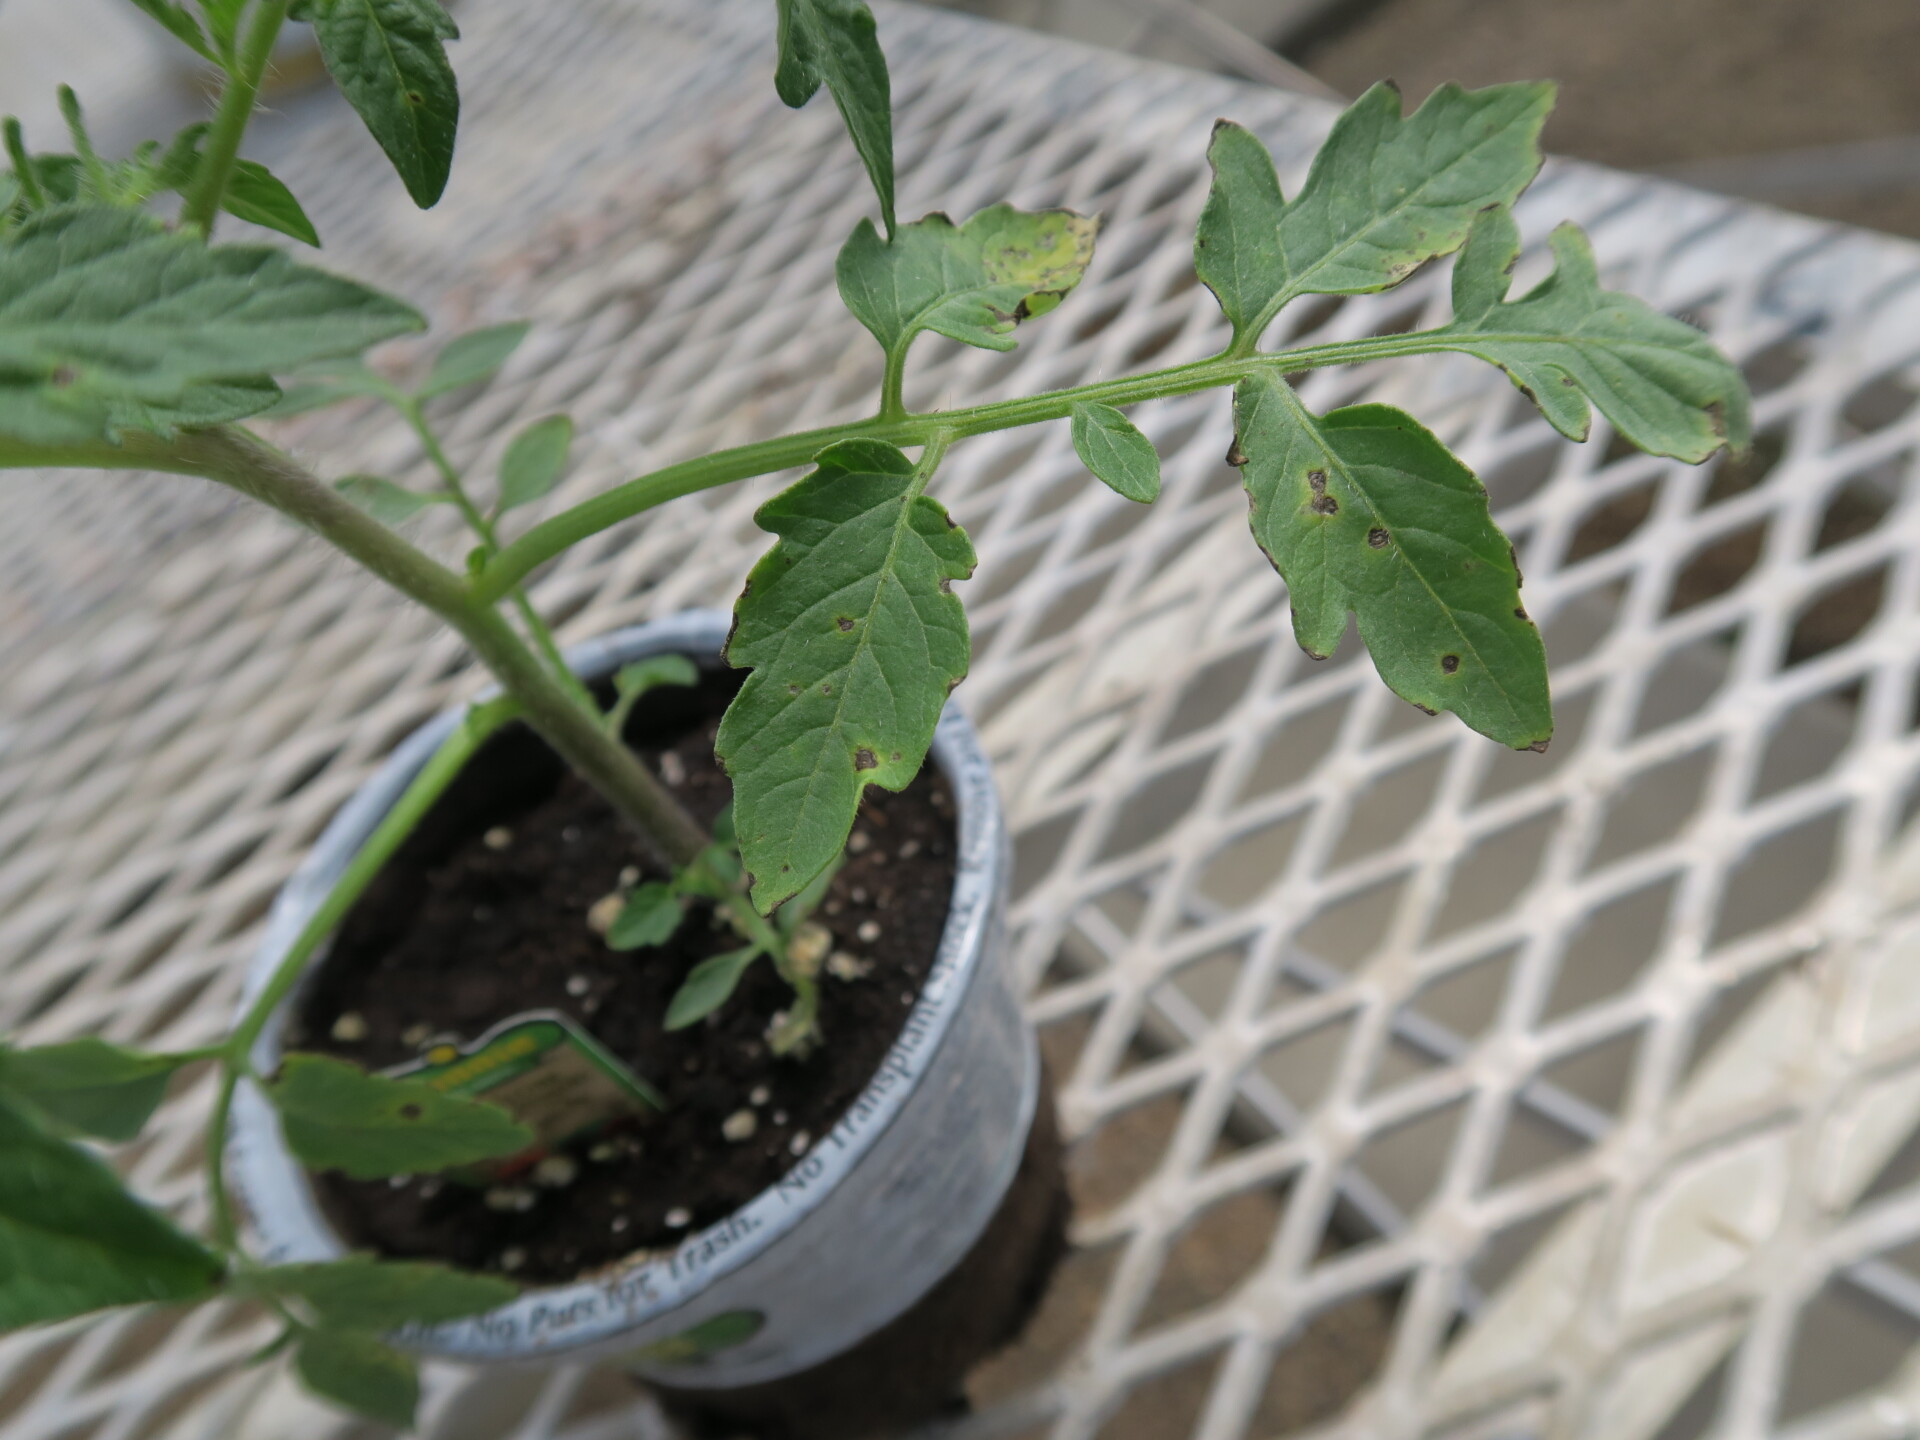 Figure 4. Leaf lesions of bacterial speck on a retail tomato transplant.